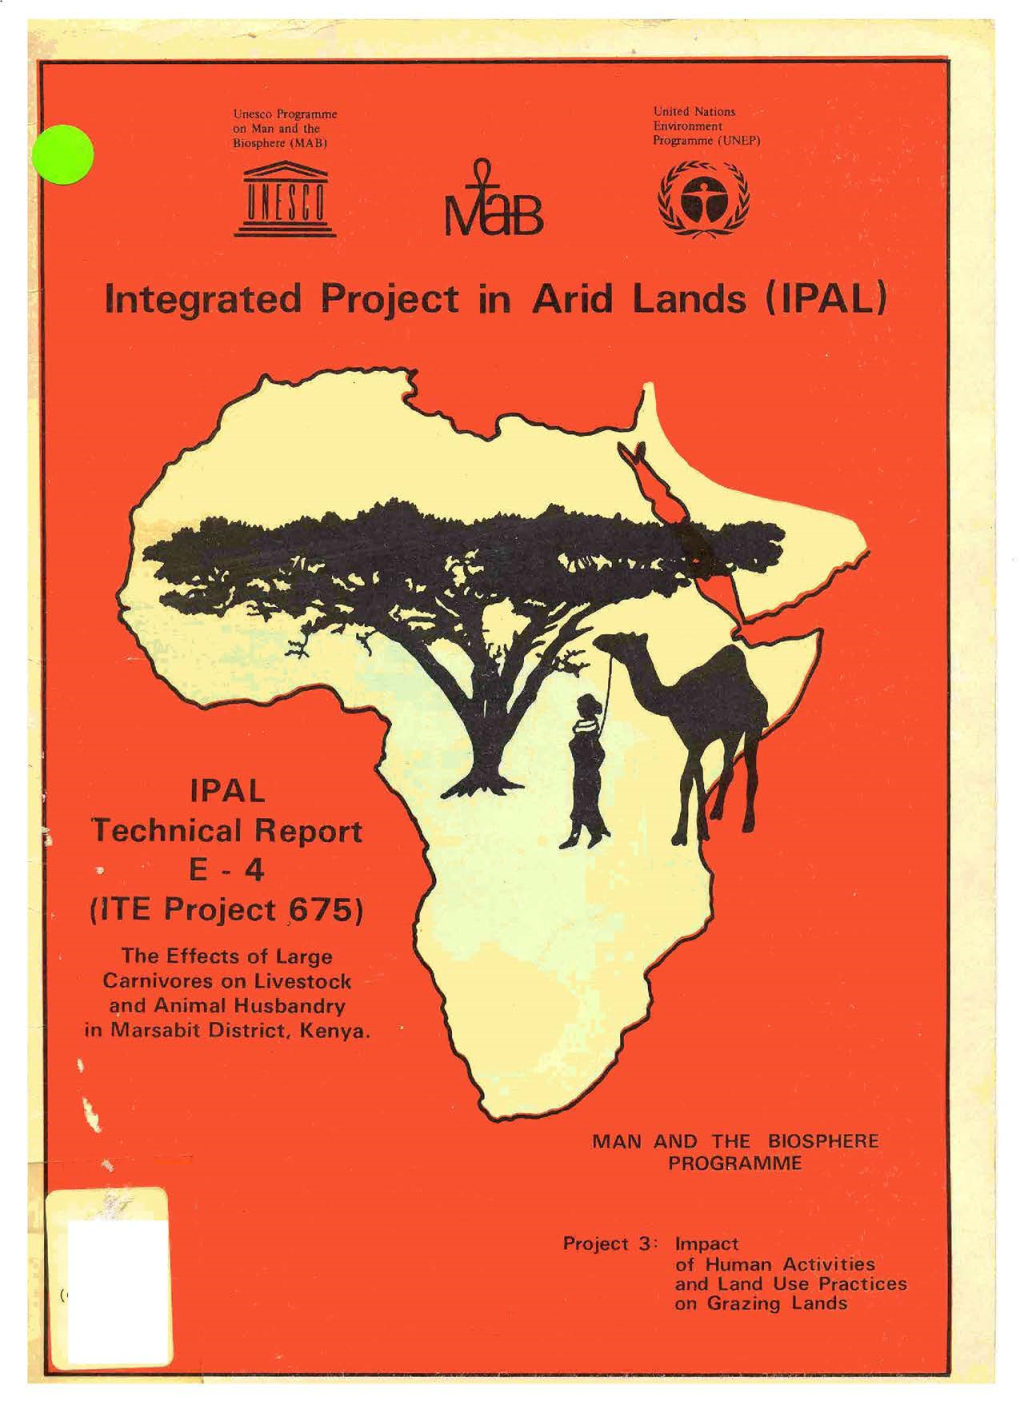 Integrated Project in Arid Lands (IPAL)